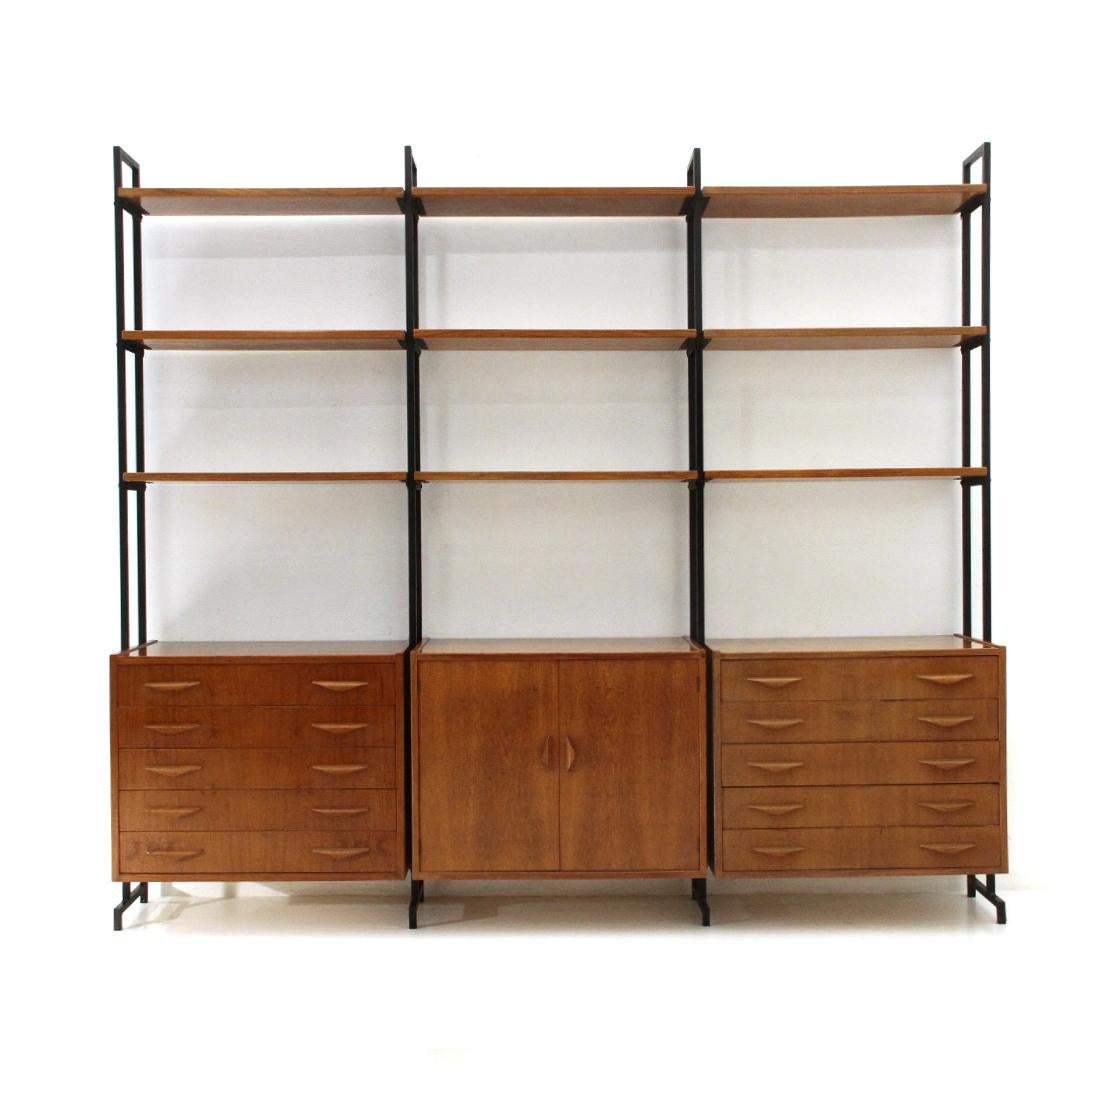 Italian Bookcase with 2 Drawers and Shelves, 1960s